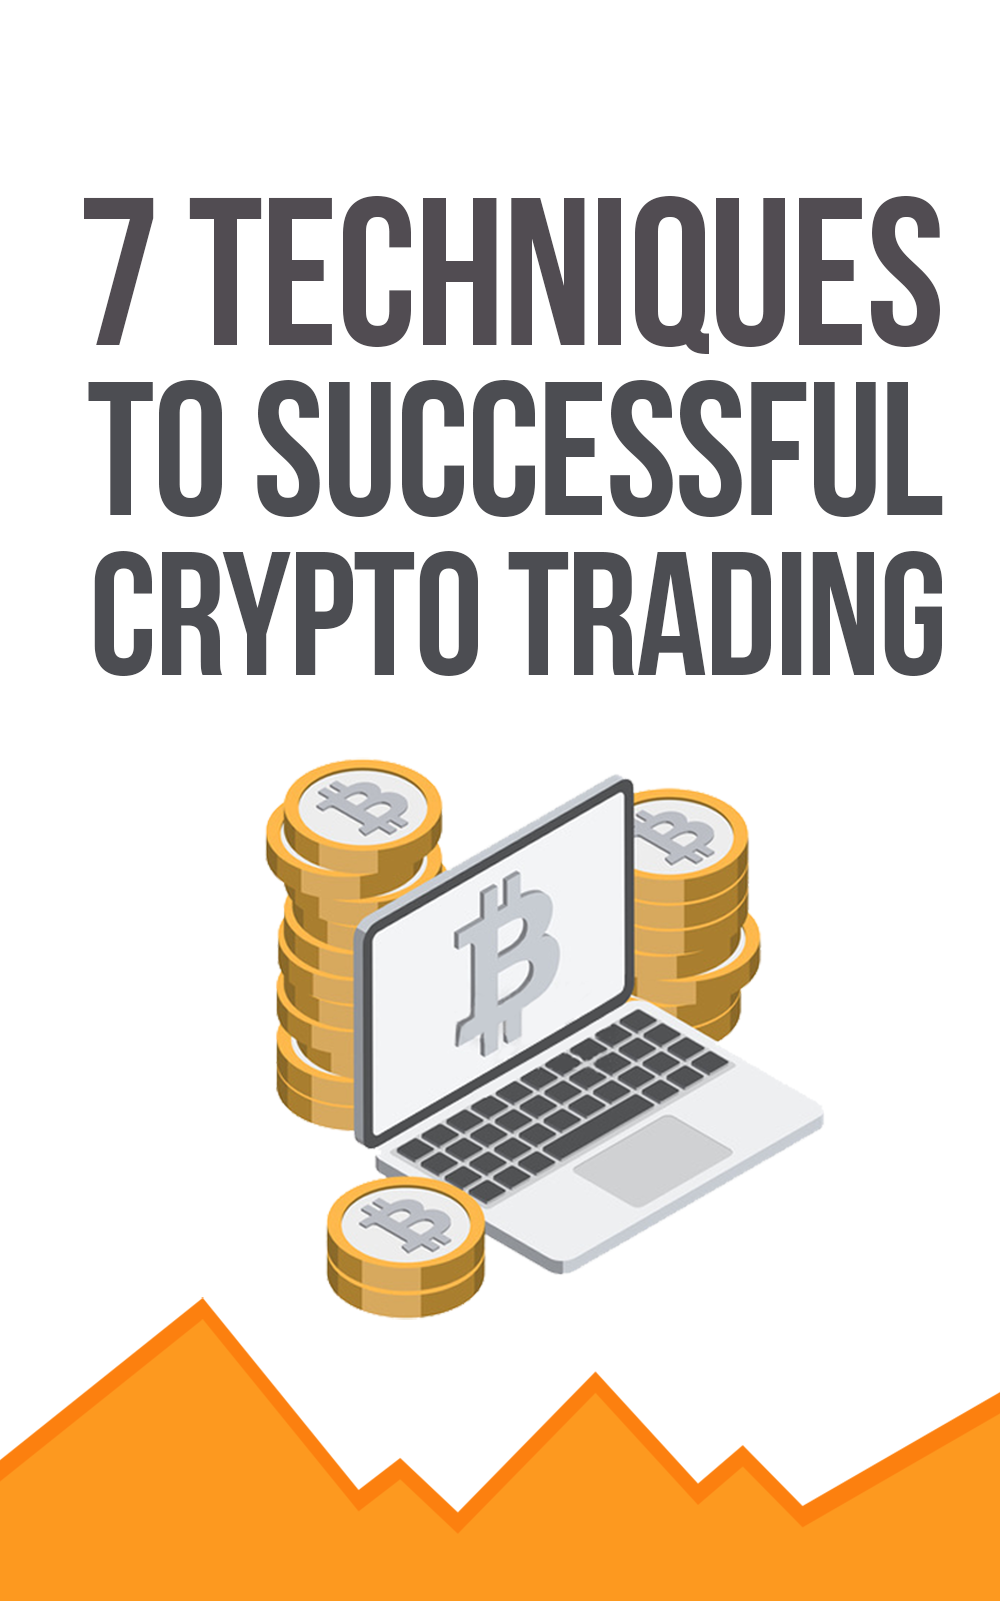 7 Techniques to successful crypto trading